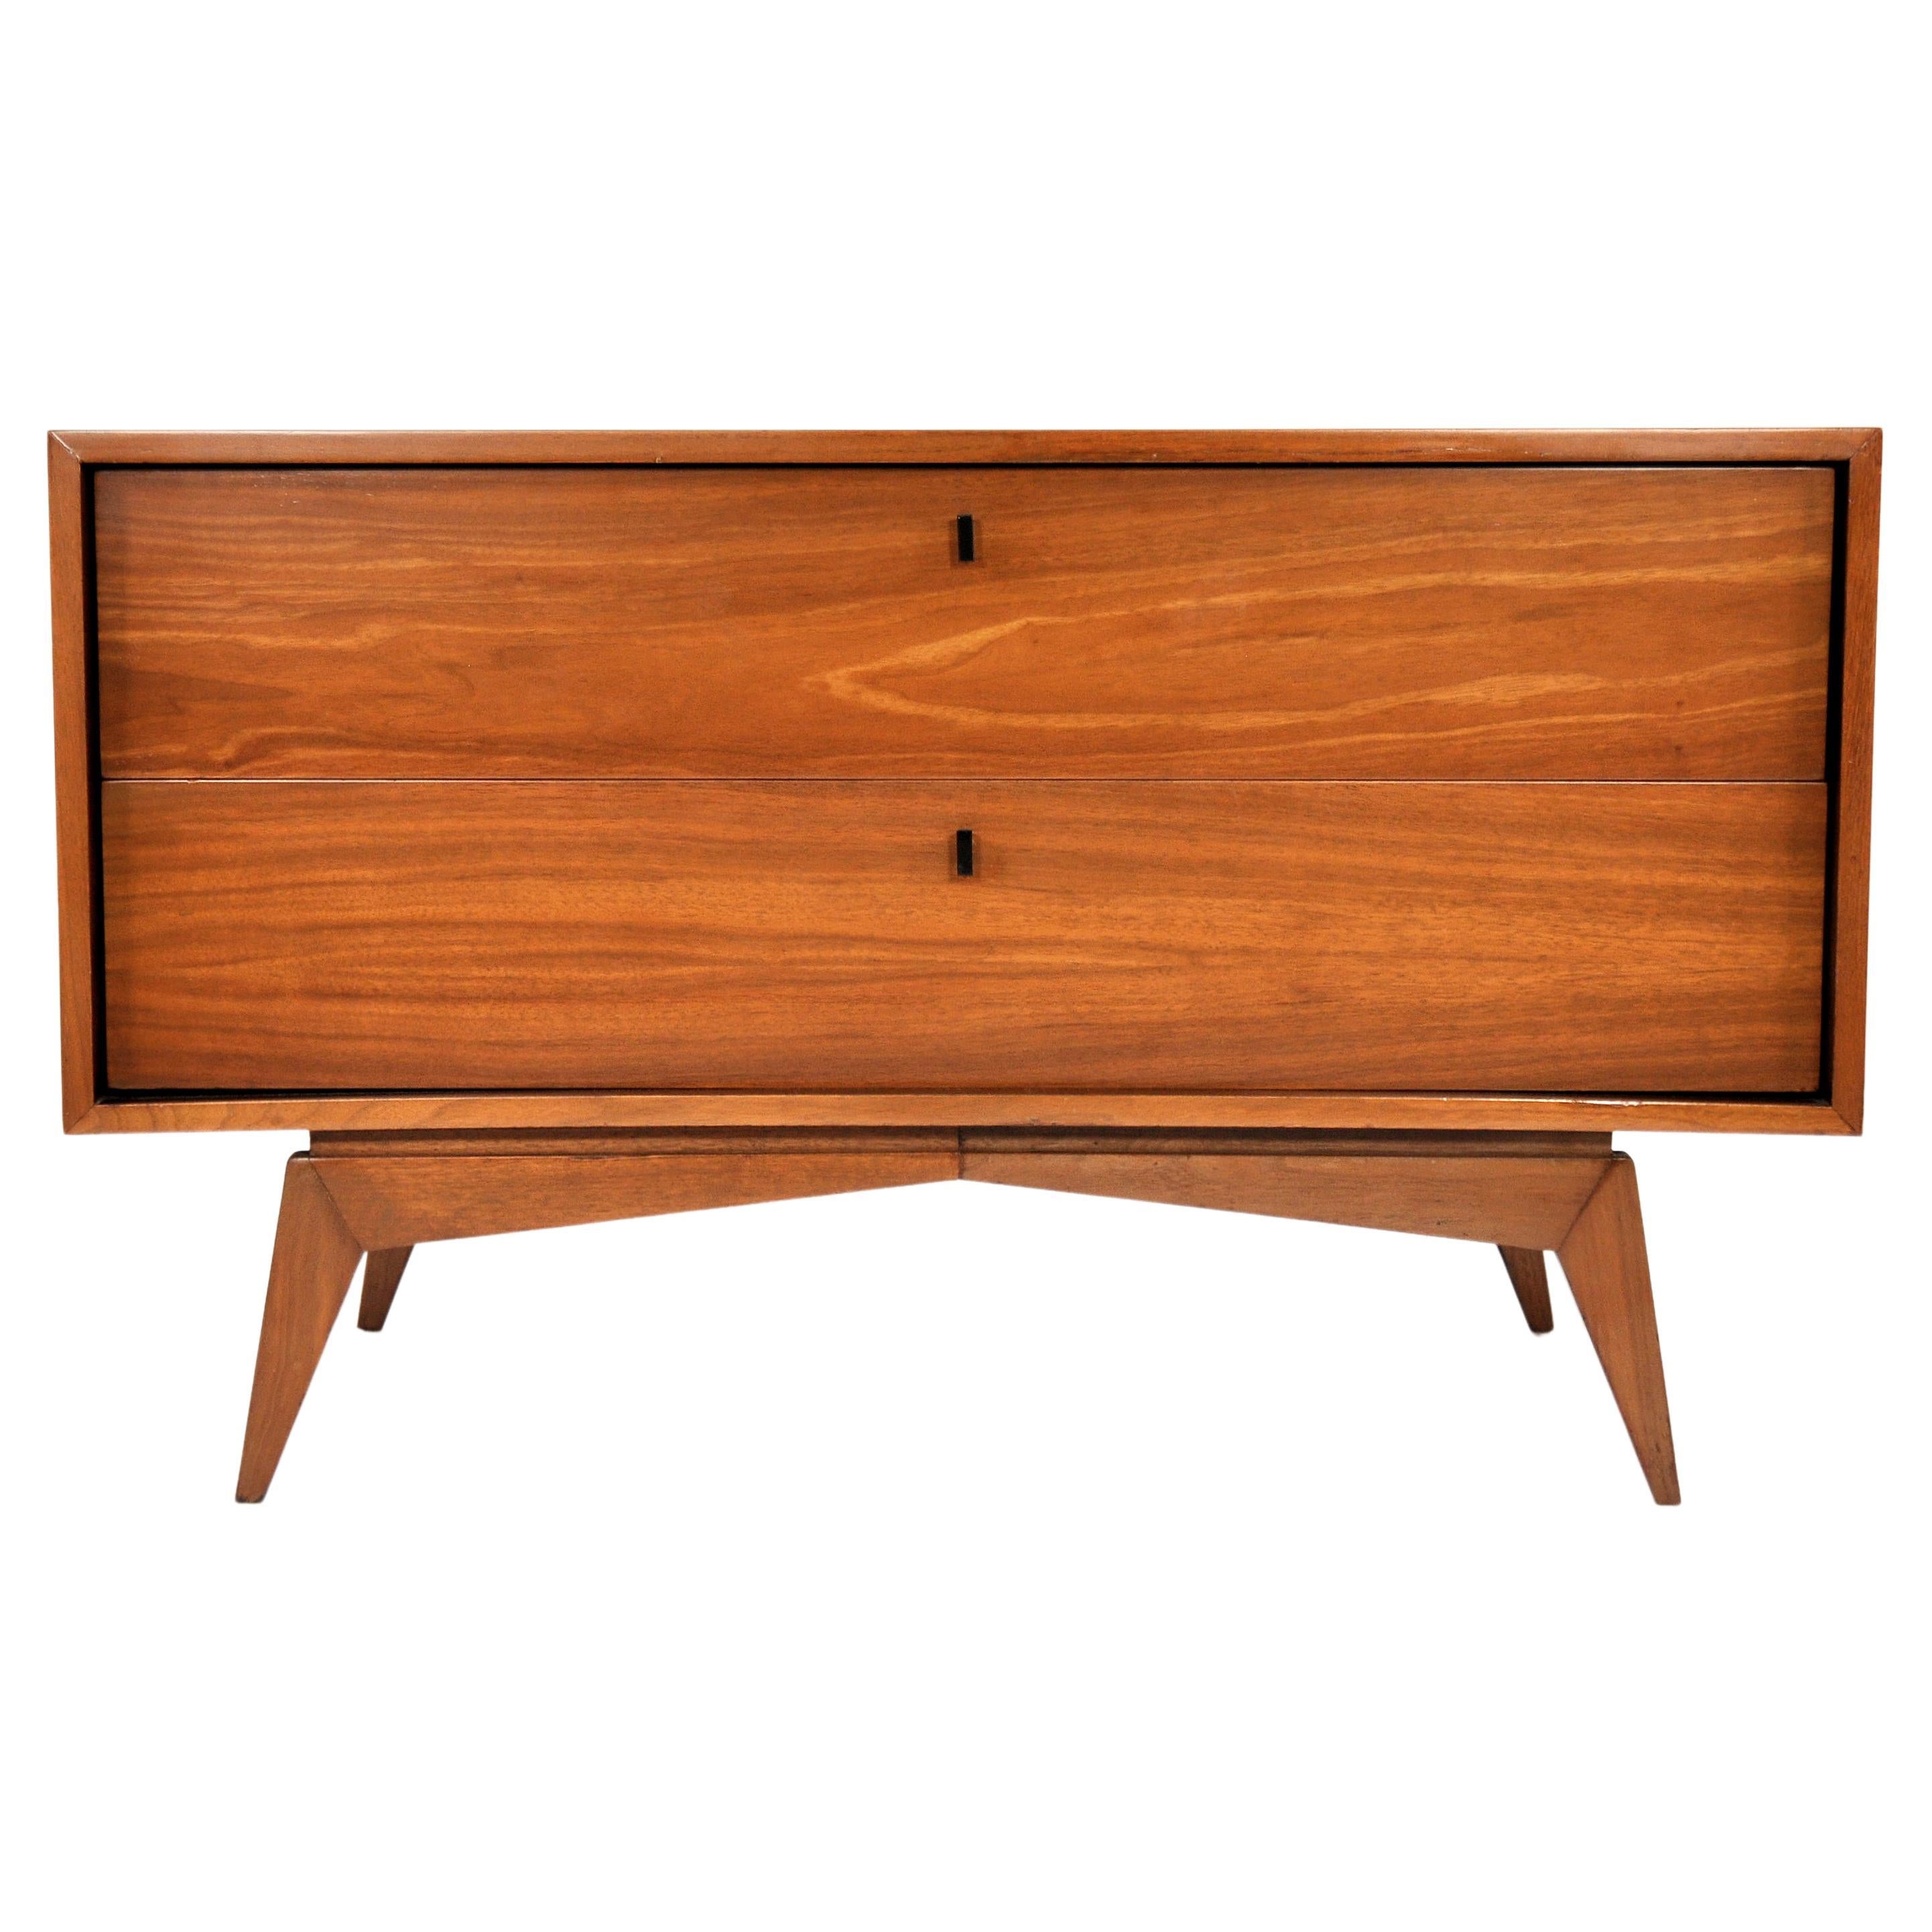 A striking vintage Mid-Century Modern walnut chest of drawers dating from the late 1950s to early 1960s. The sculptural bachelor or gentleman's chest's removable top piece features two doors with sculpted fronts opening to an interior fitted with